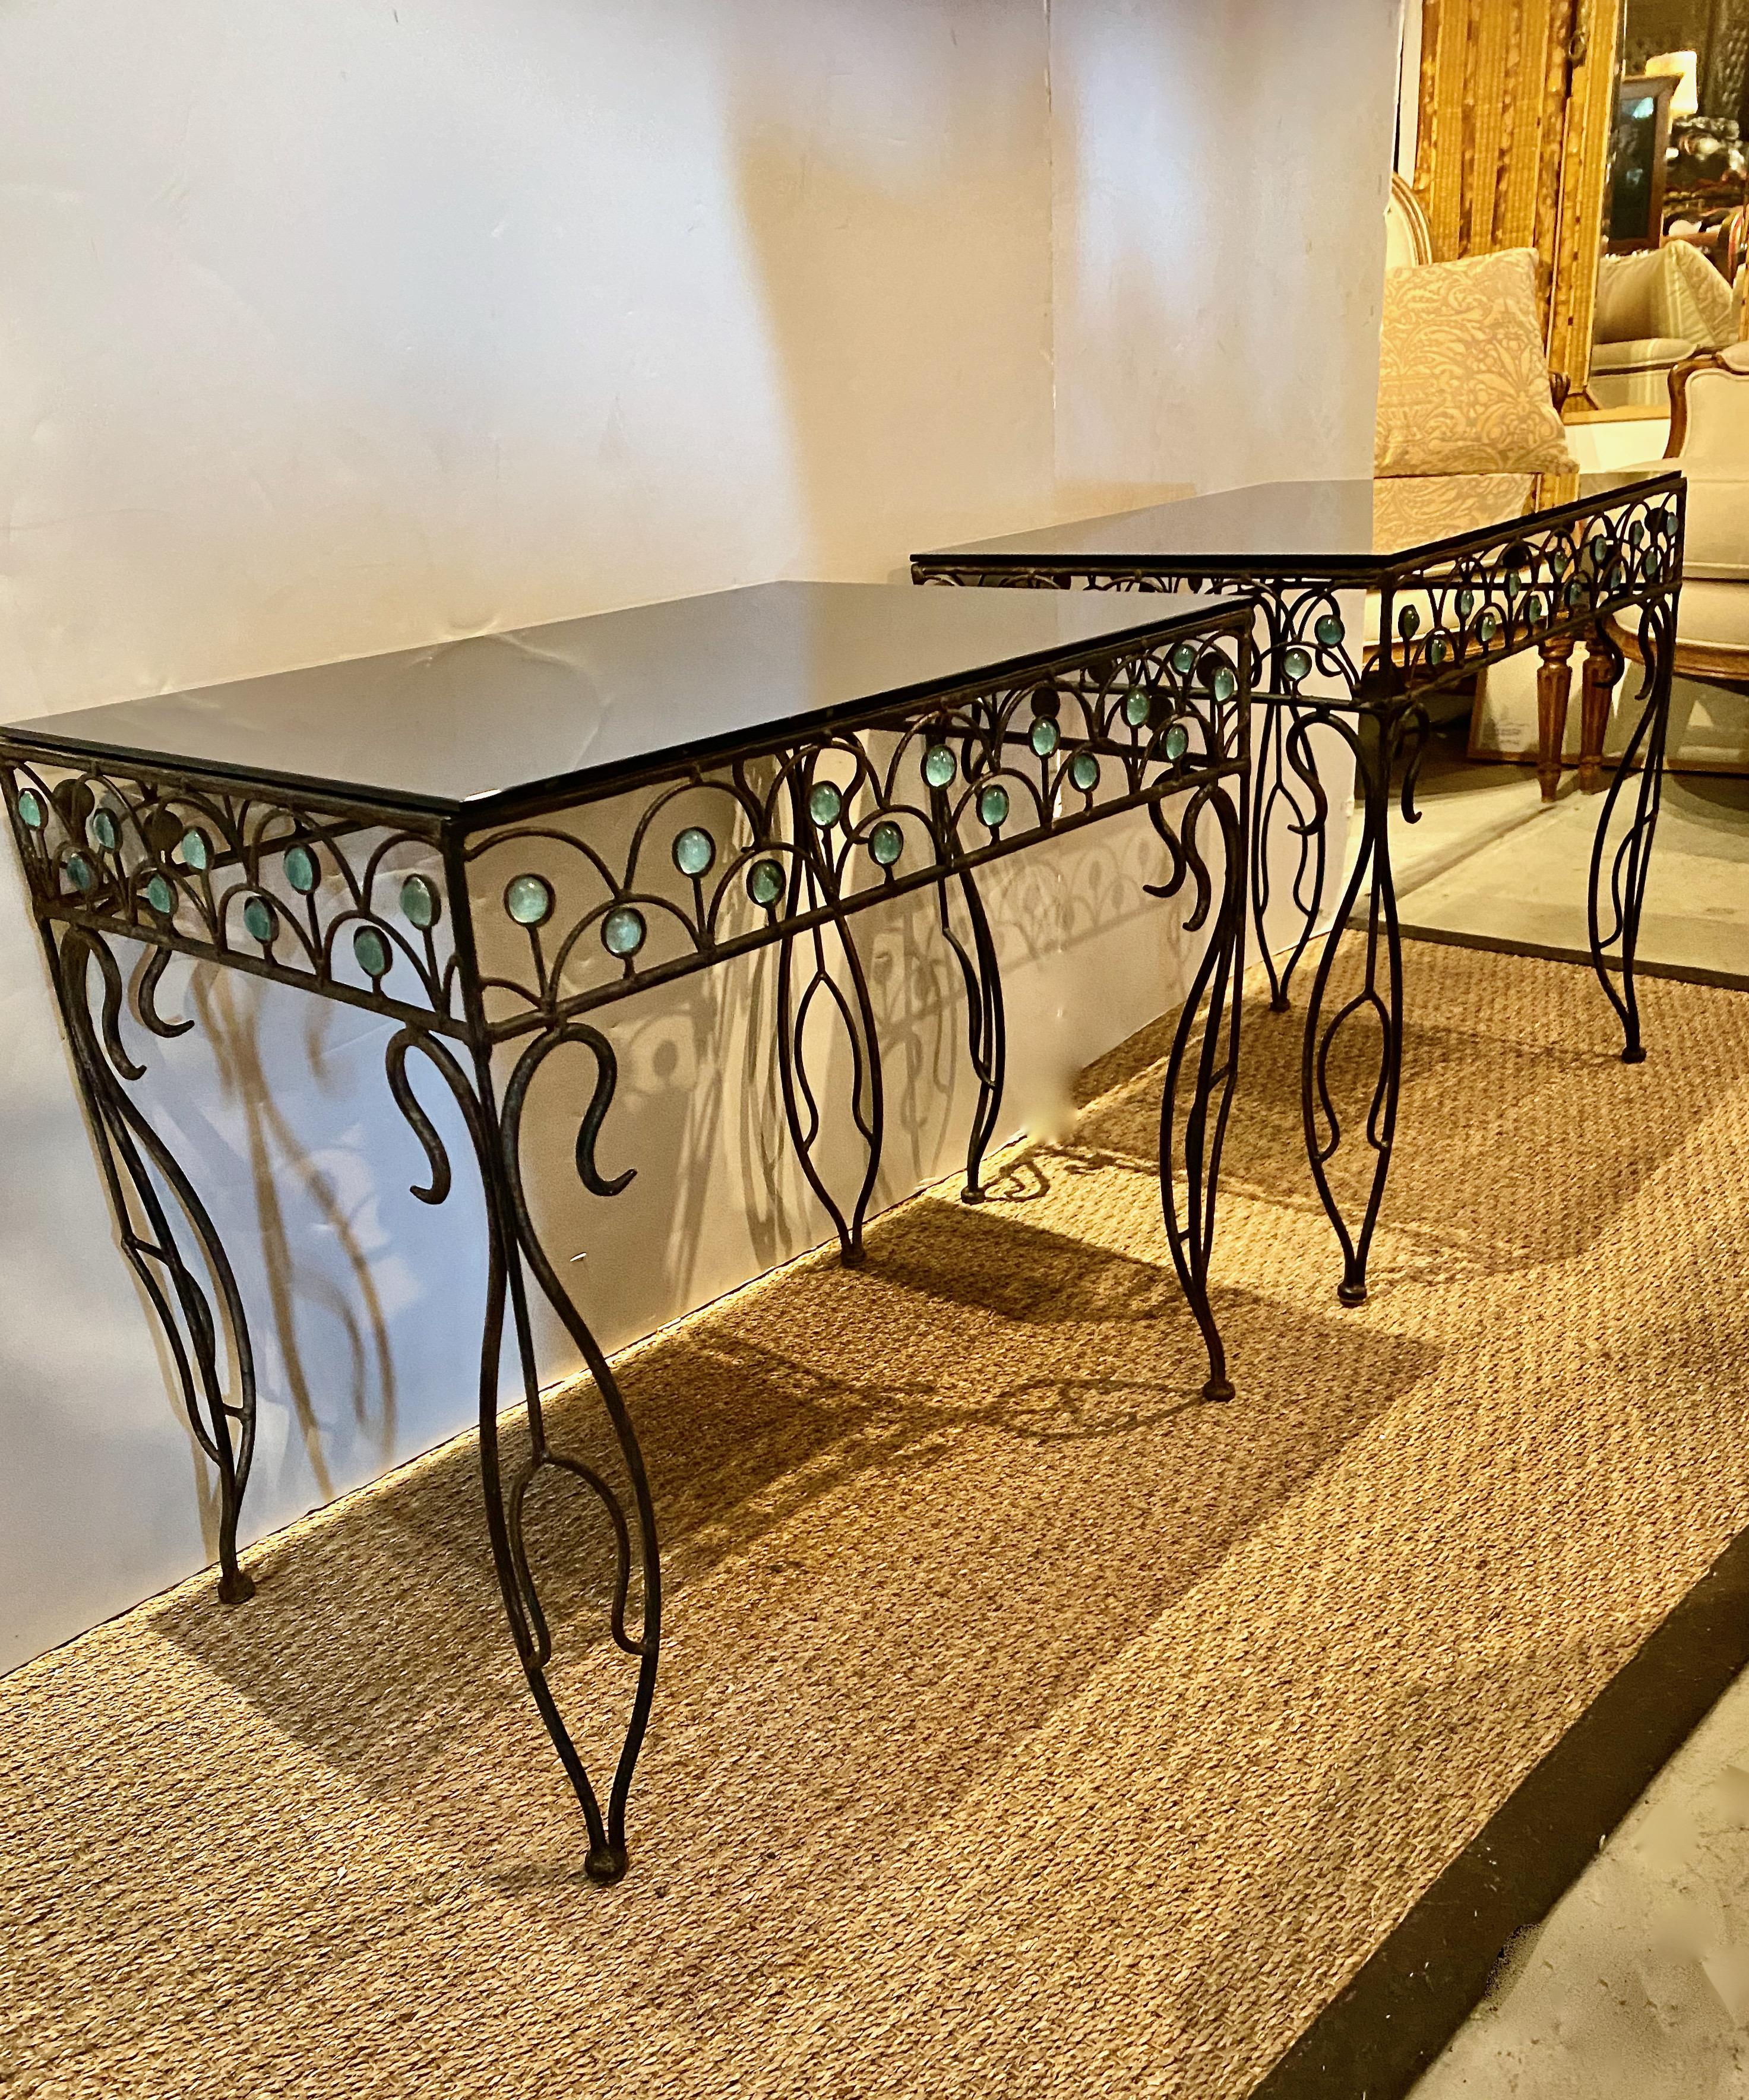 This is a unique pair of period French Art Deco side tables. The wrought iron tables are finely detailed in an iconic Art Deco arch motif with blue murano glass embellishments. The legs are fanciful with an unusual sinuous design. We have added a